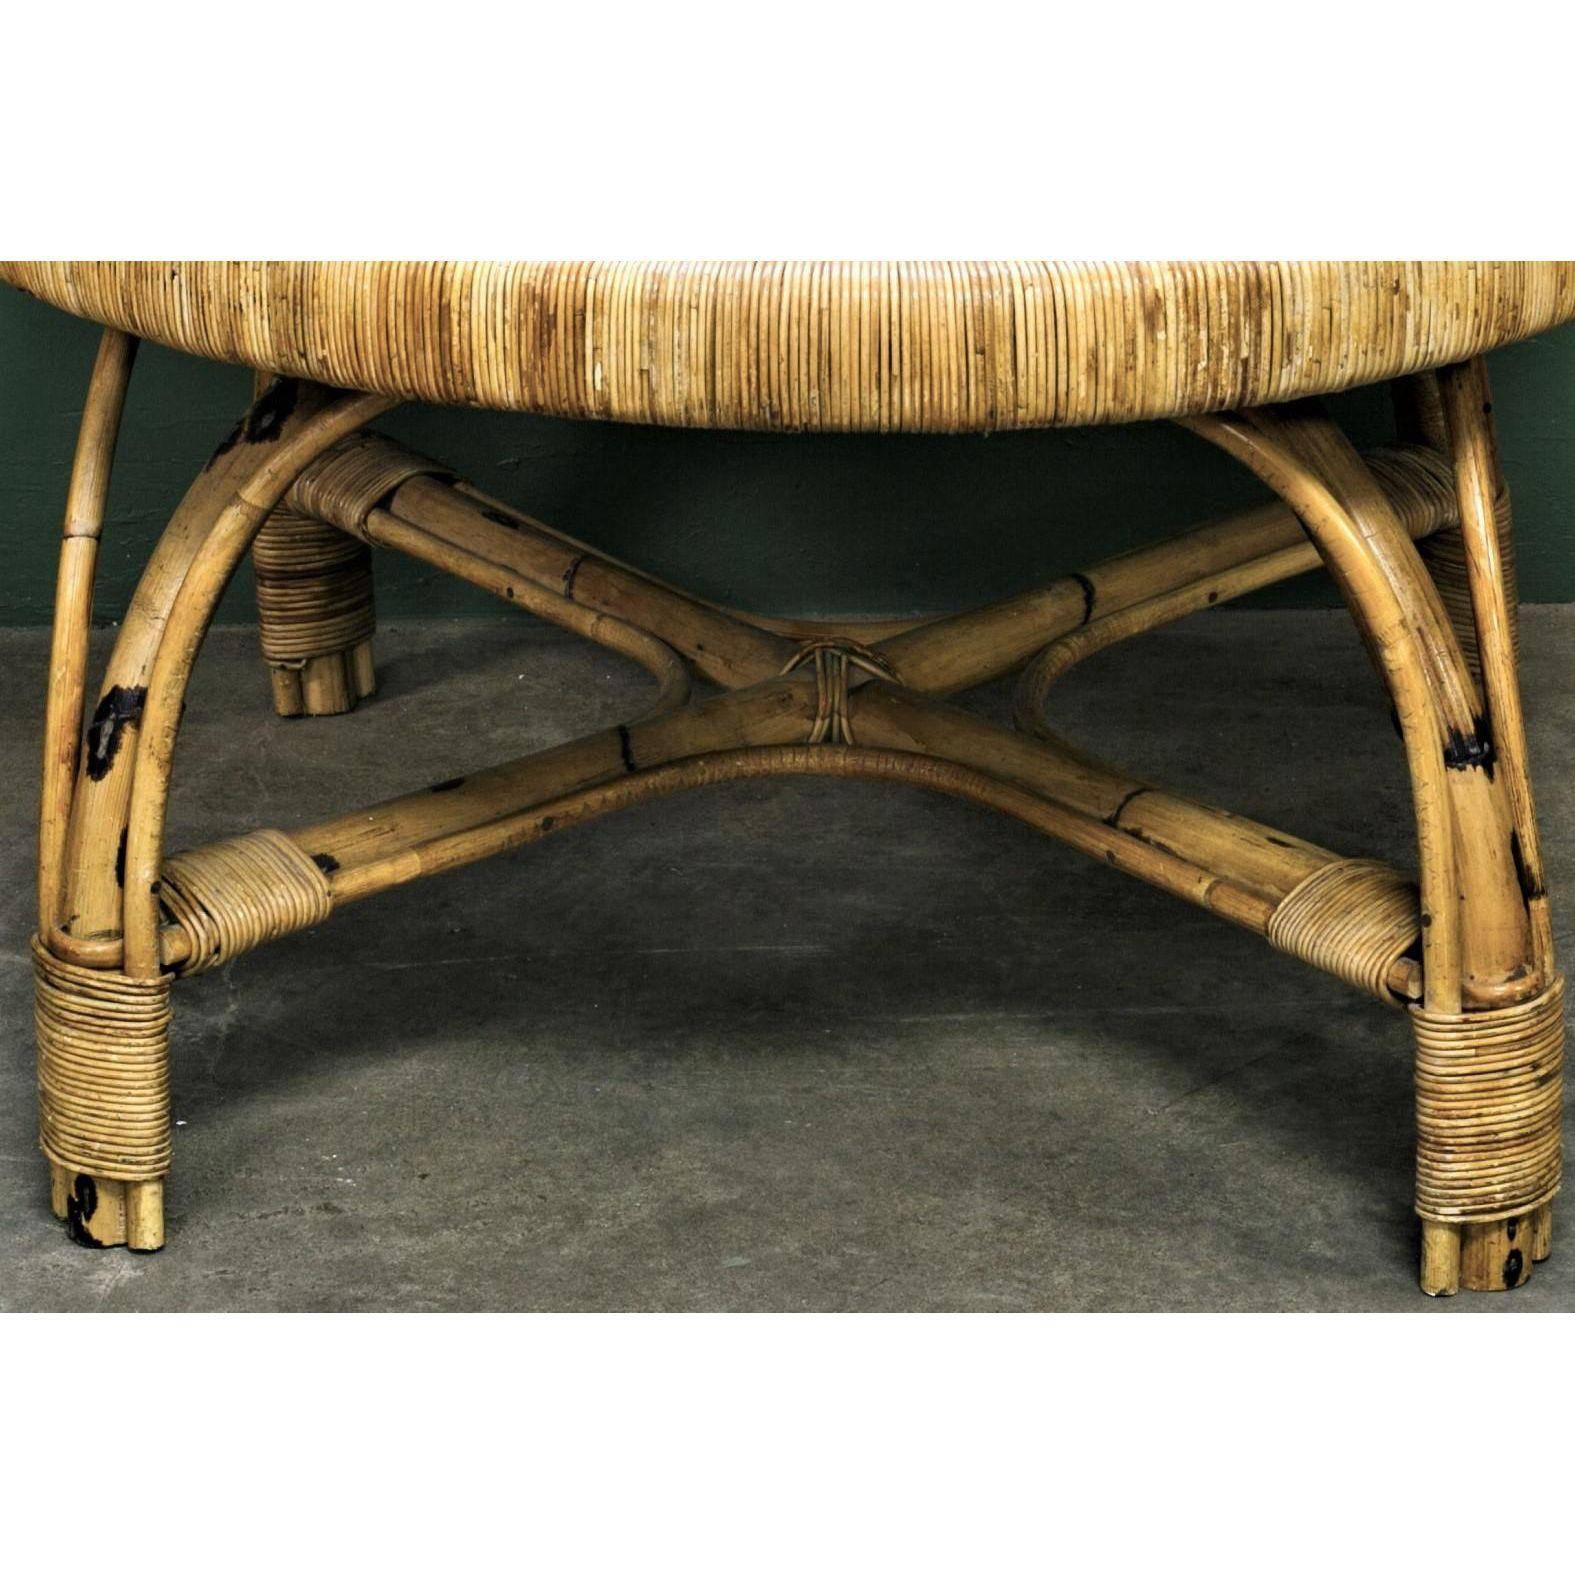 Vintage tortoise bamboo and rattan coffee table with black glazed tile top. From France, circa 1950.  Wrapped wicker style banding around the top and on the legs. X-frame stretcher connects the four curved legs. Diameter listed is for the legs. Top